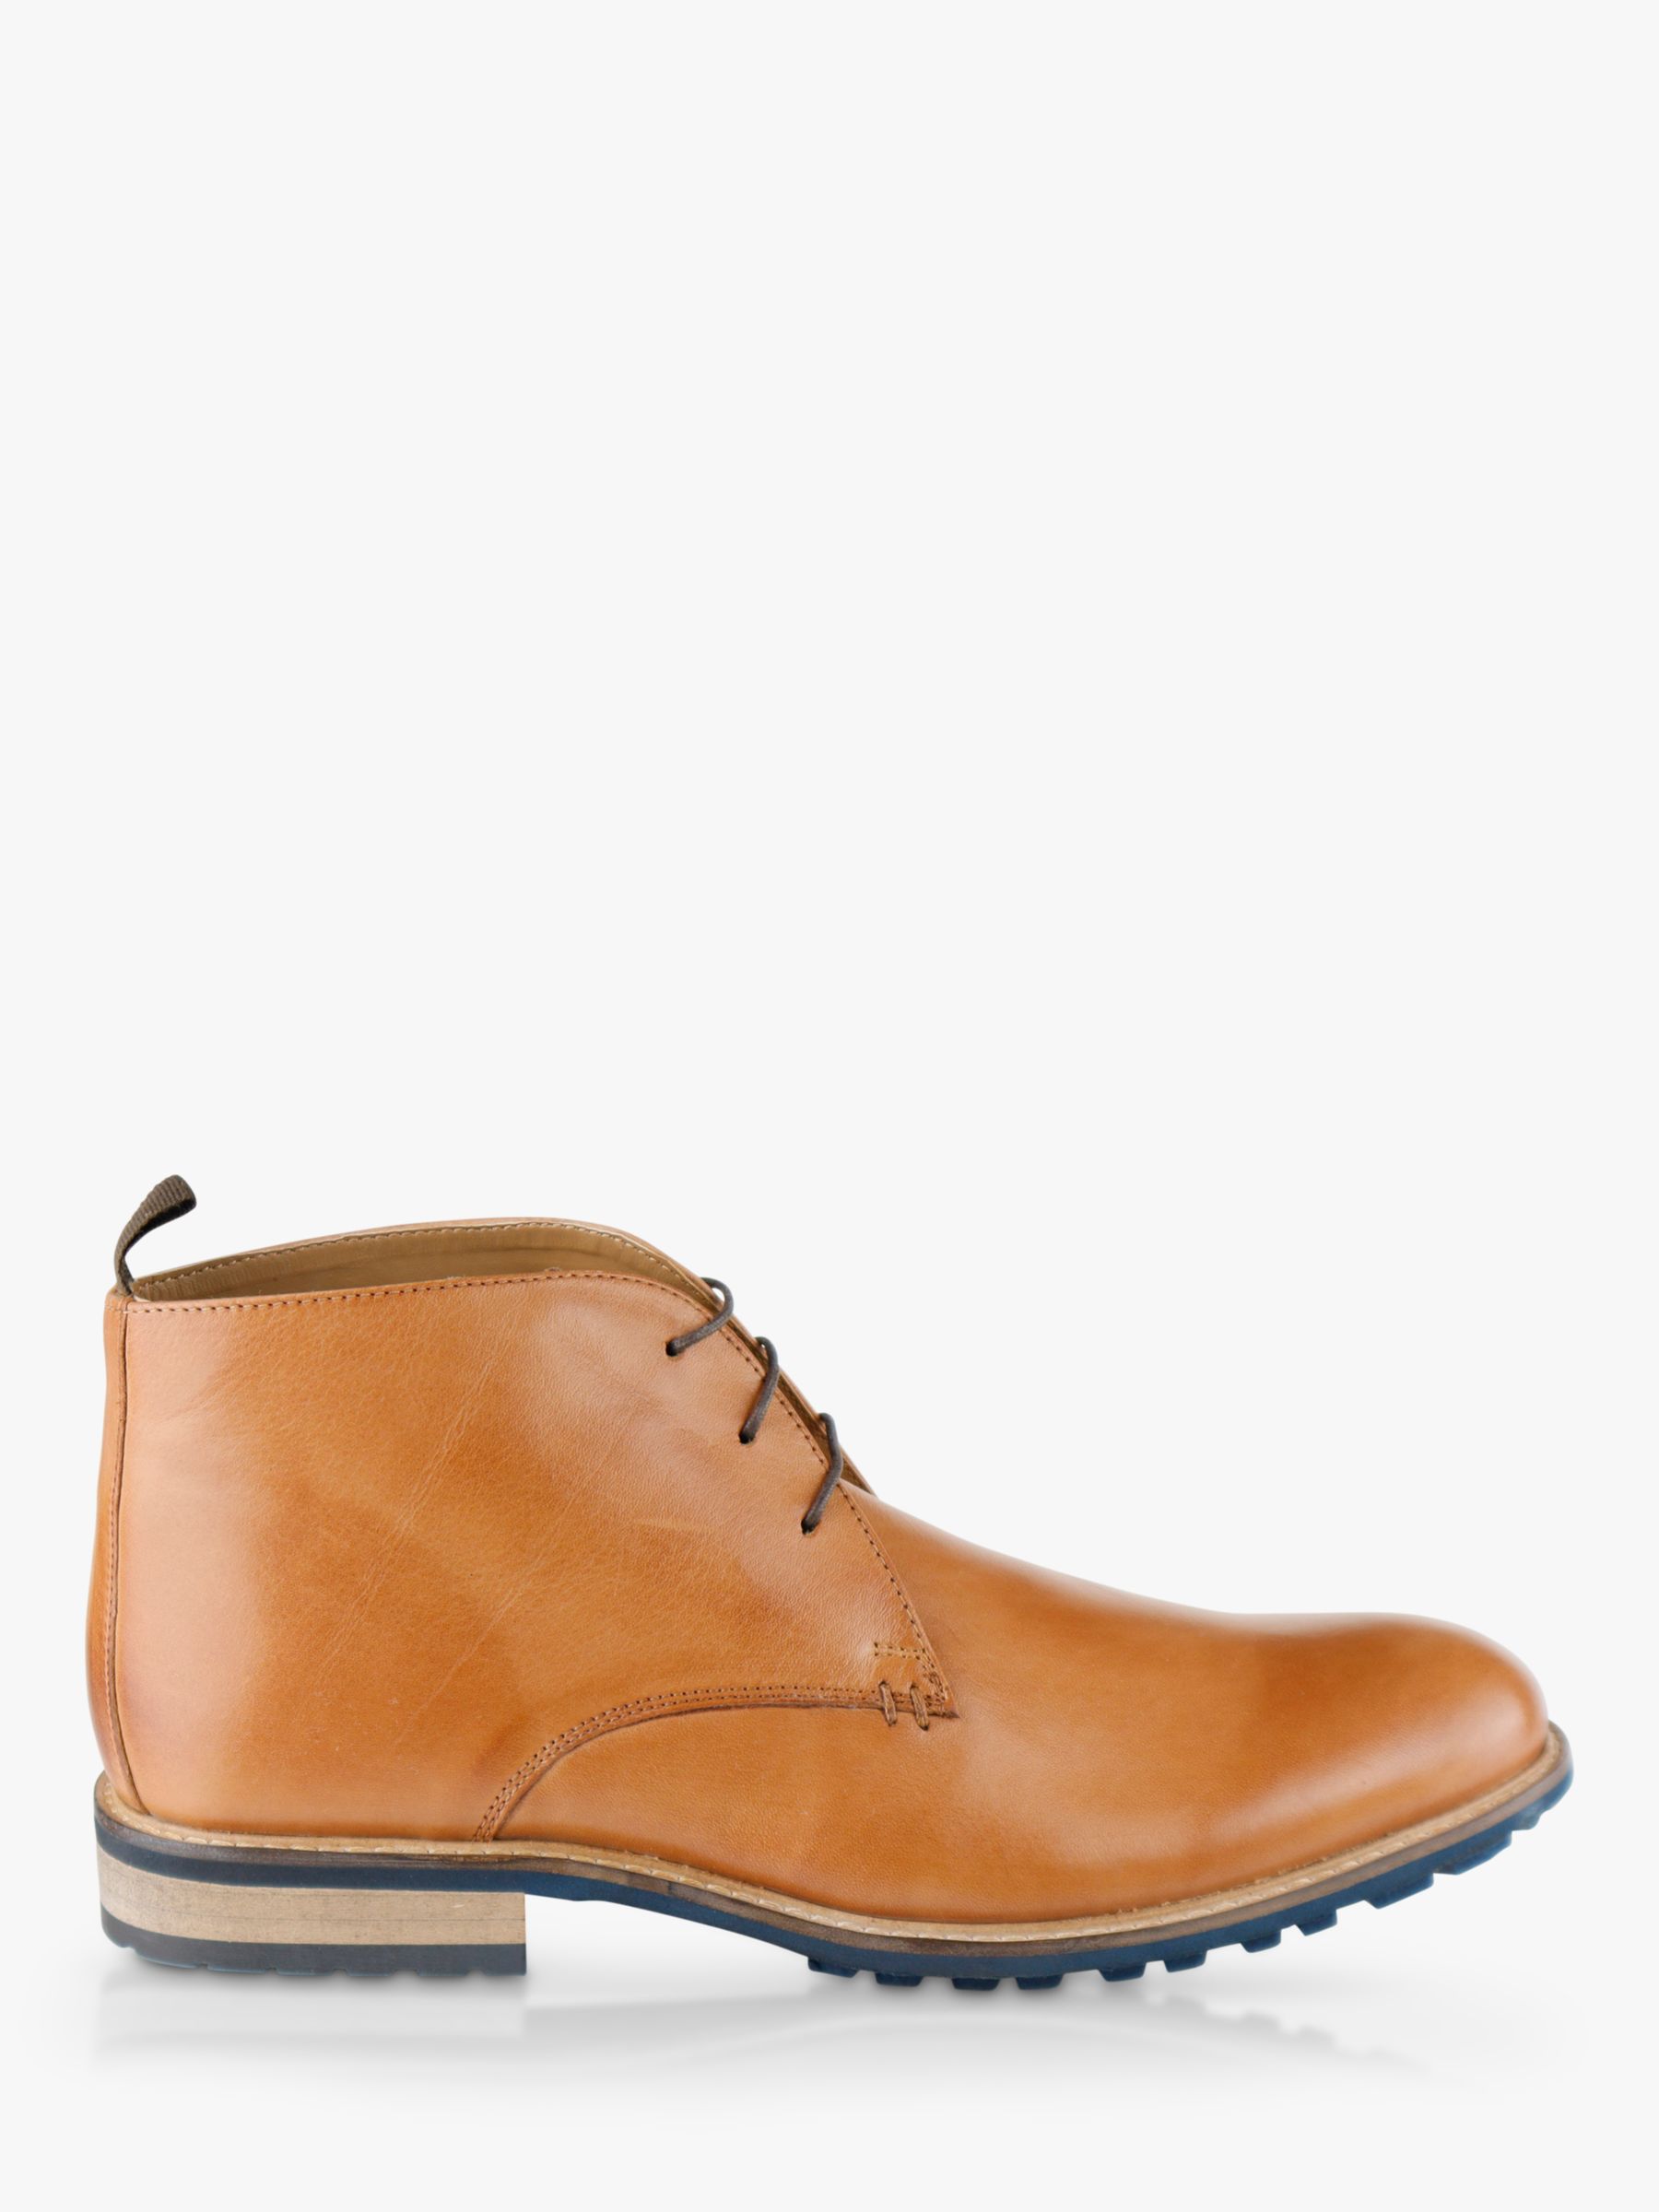 Silver Street London Ludgate Leather Chukka Boots, Tan at John Lewis ...